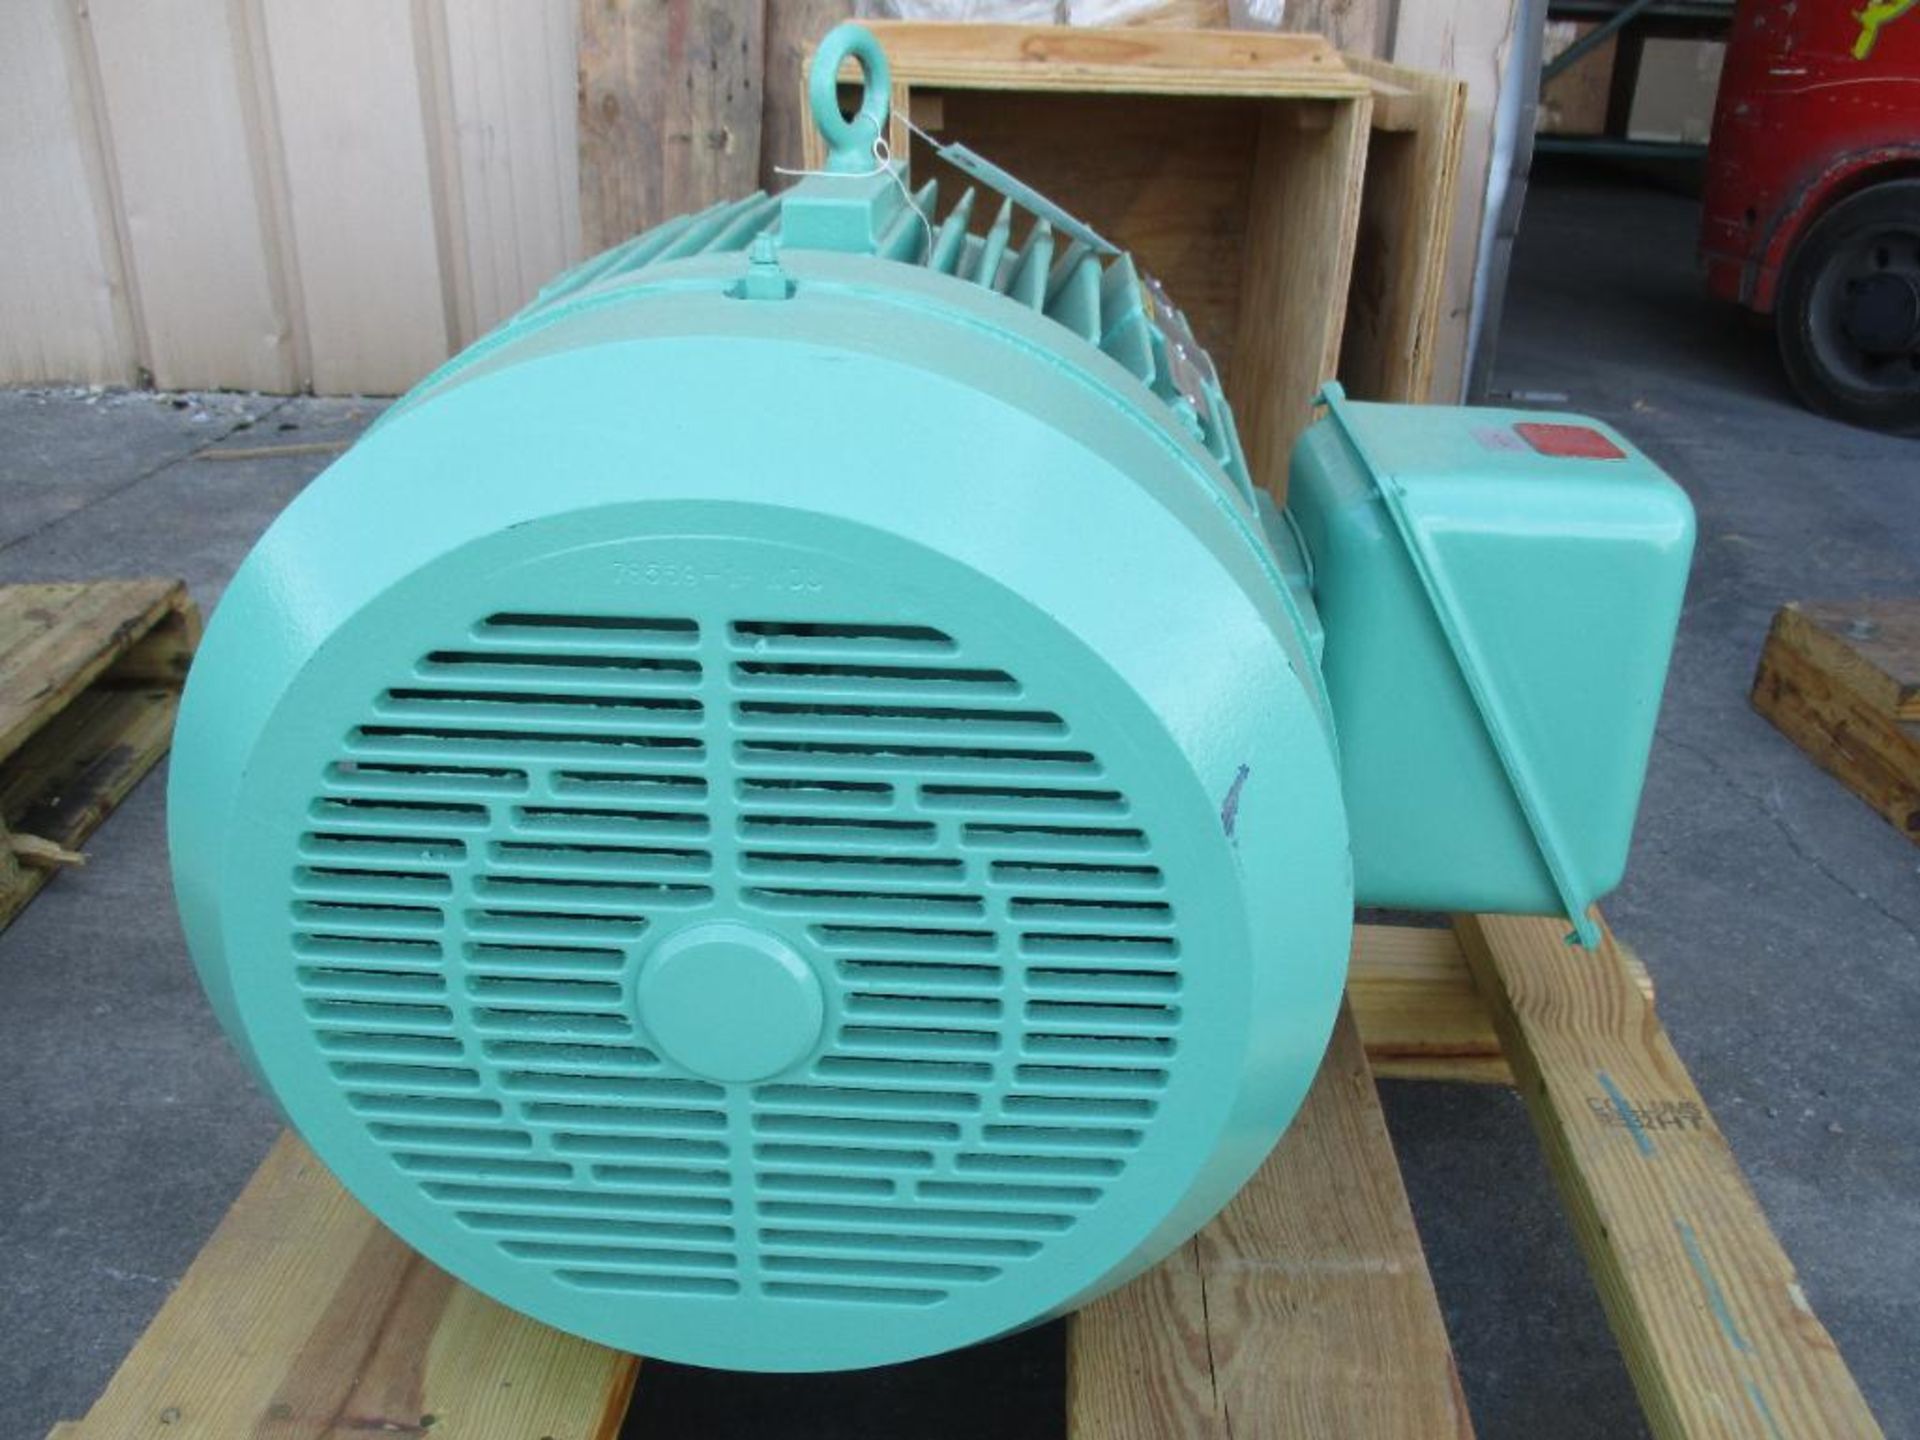 BALDOR-RELIANCE SUPER-E MOTOR A36-5299-1513 75HP 1780RPM FRAME 365JP 3 PHASE ELECTRIC MOTOR 985# LBS - Image 4 of 5